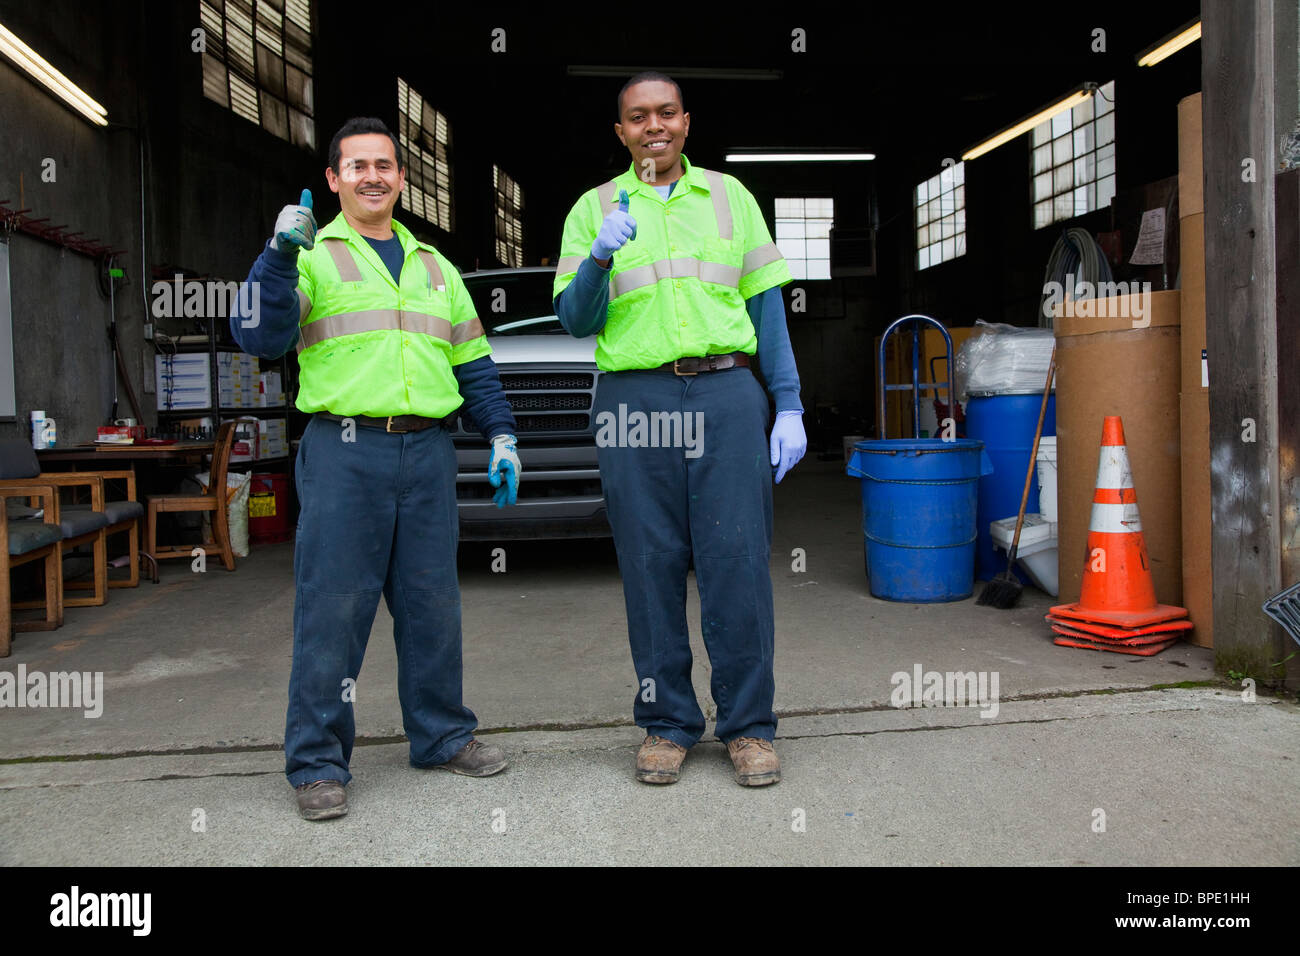 Sanitation workers giving thumbs up in garage Stock Photo